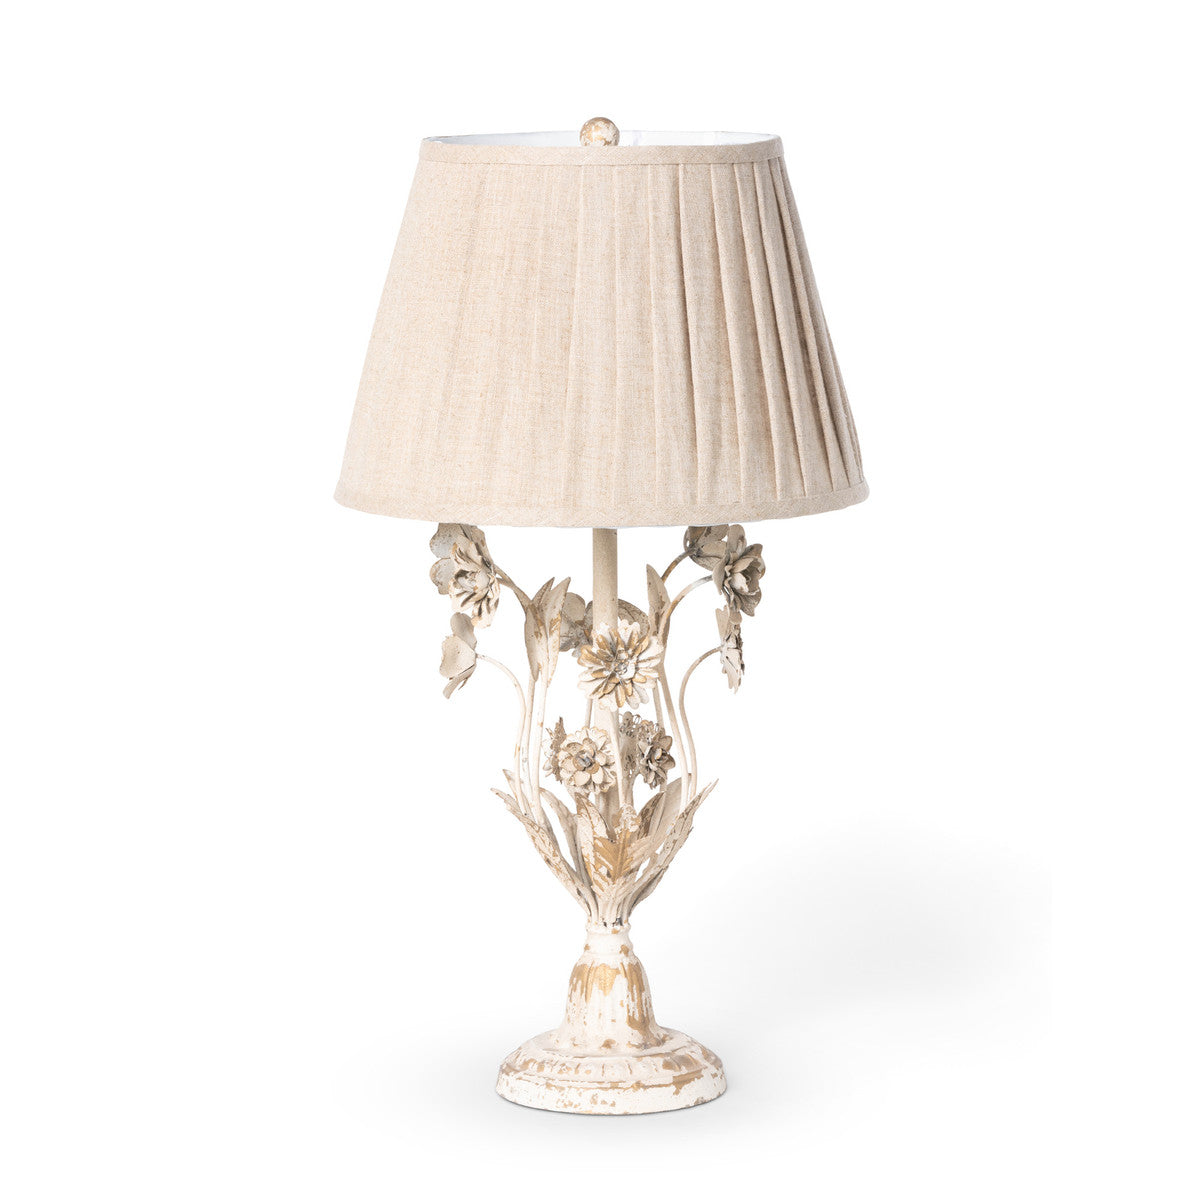 French Chateau Lamp- More Coming Soon!